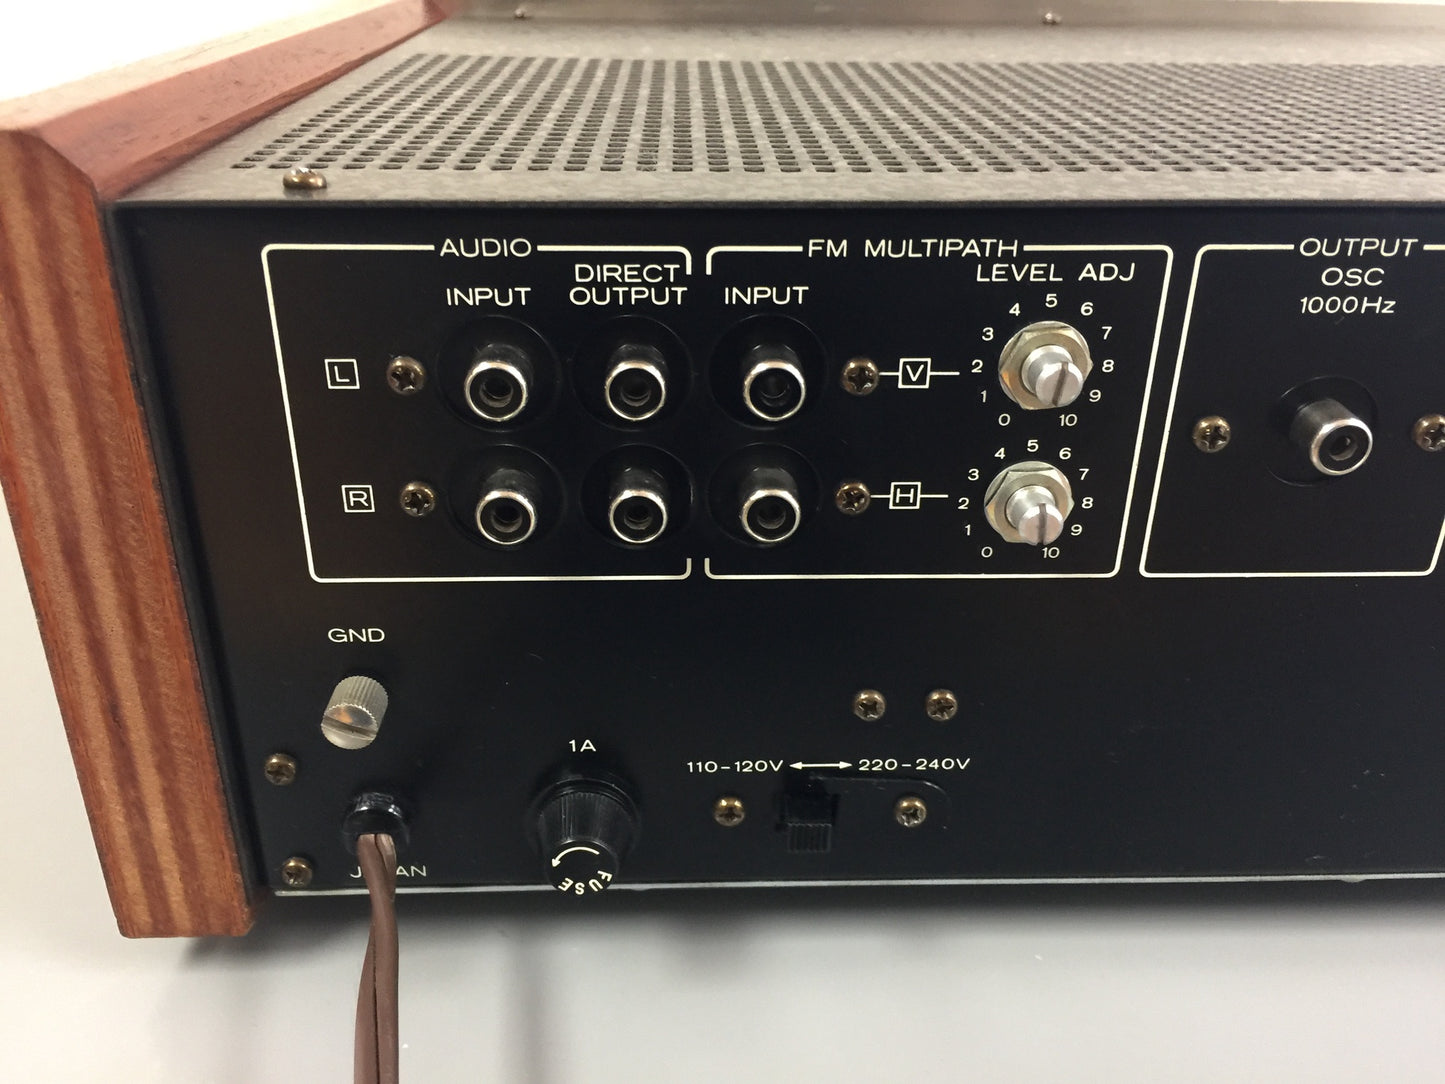 Kenwood KC-6060A Solid State Lab-Scope